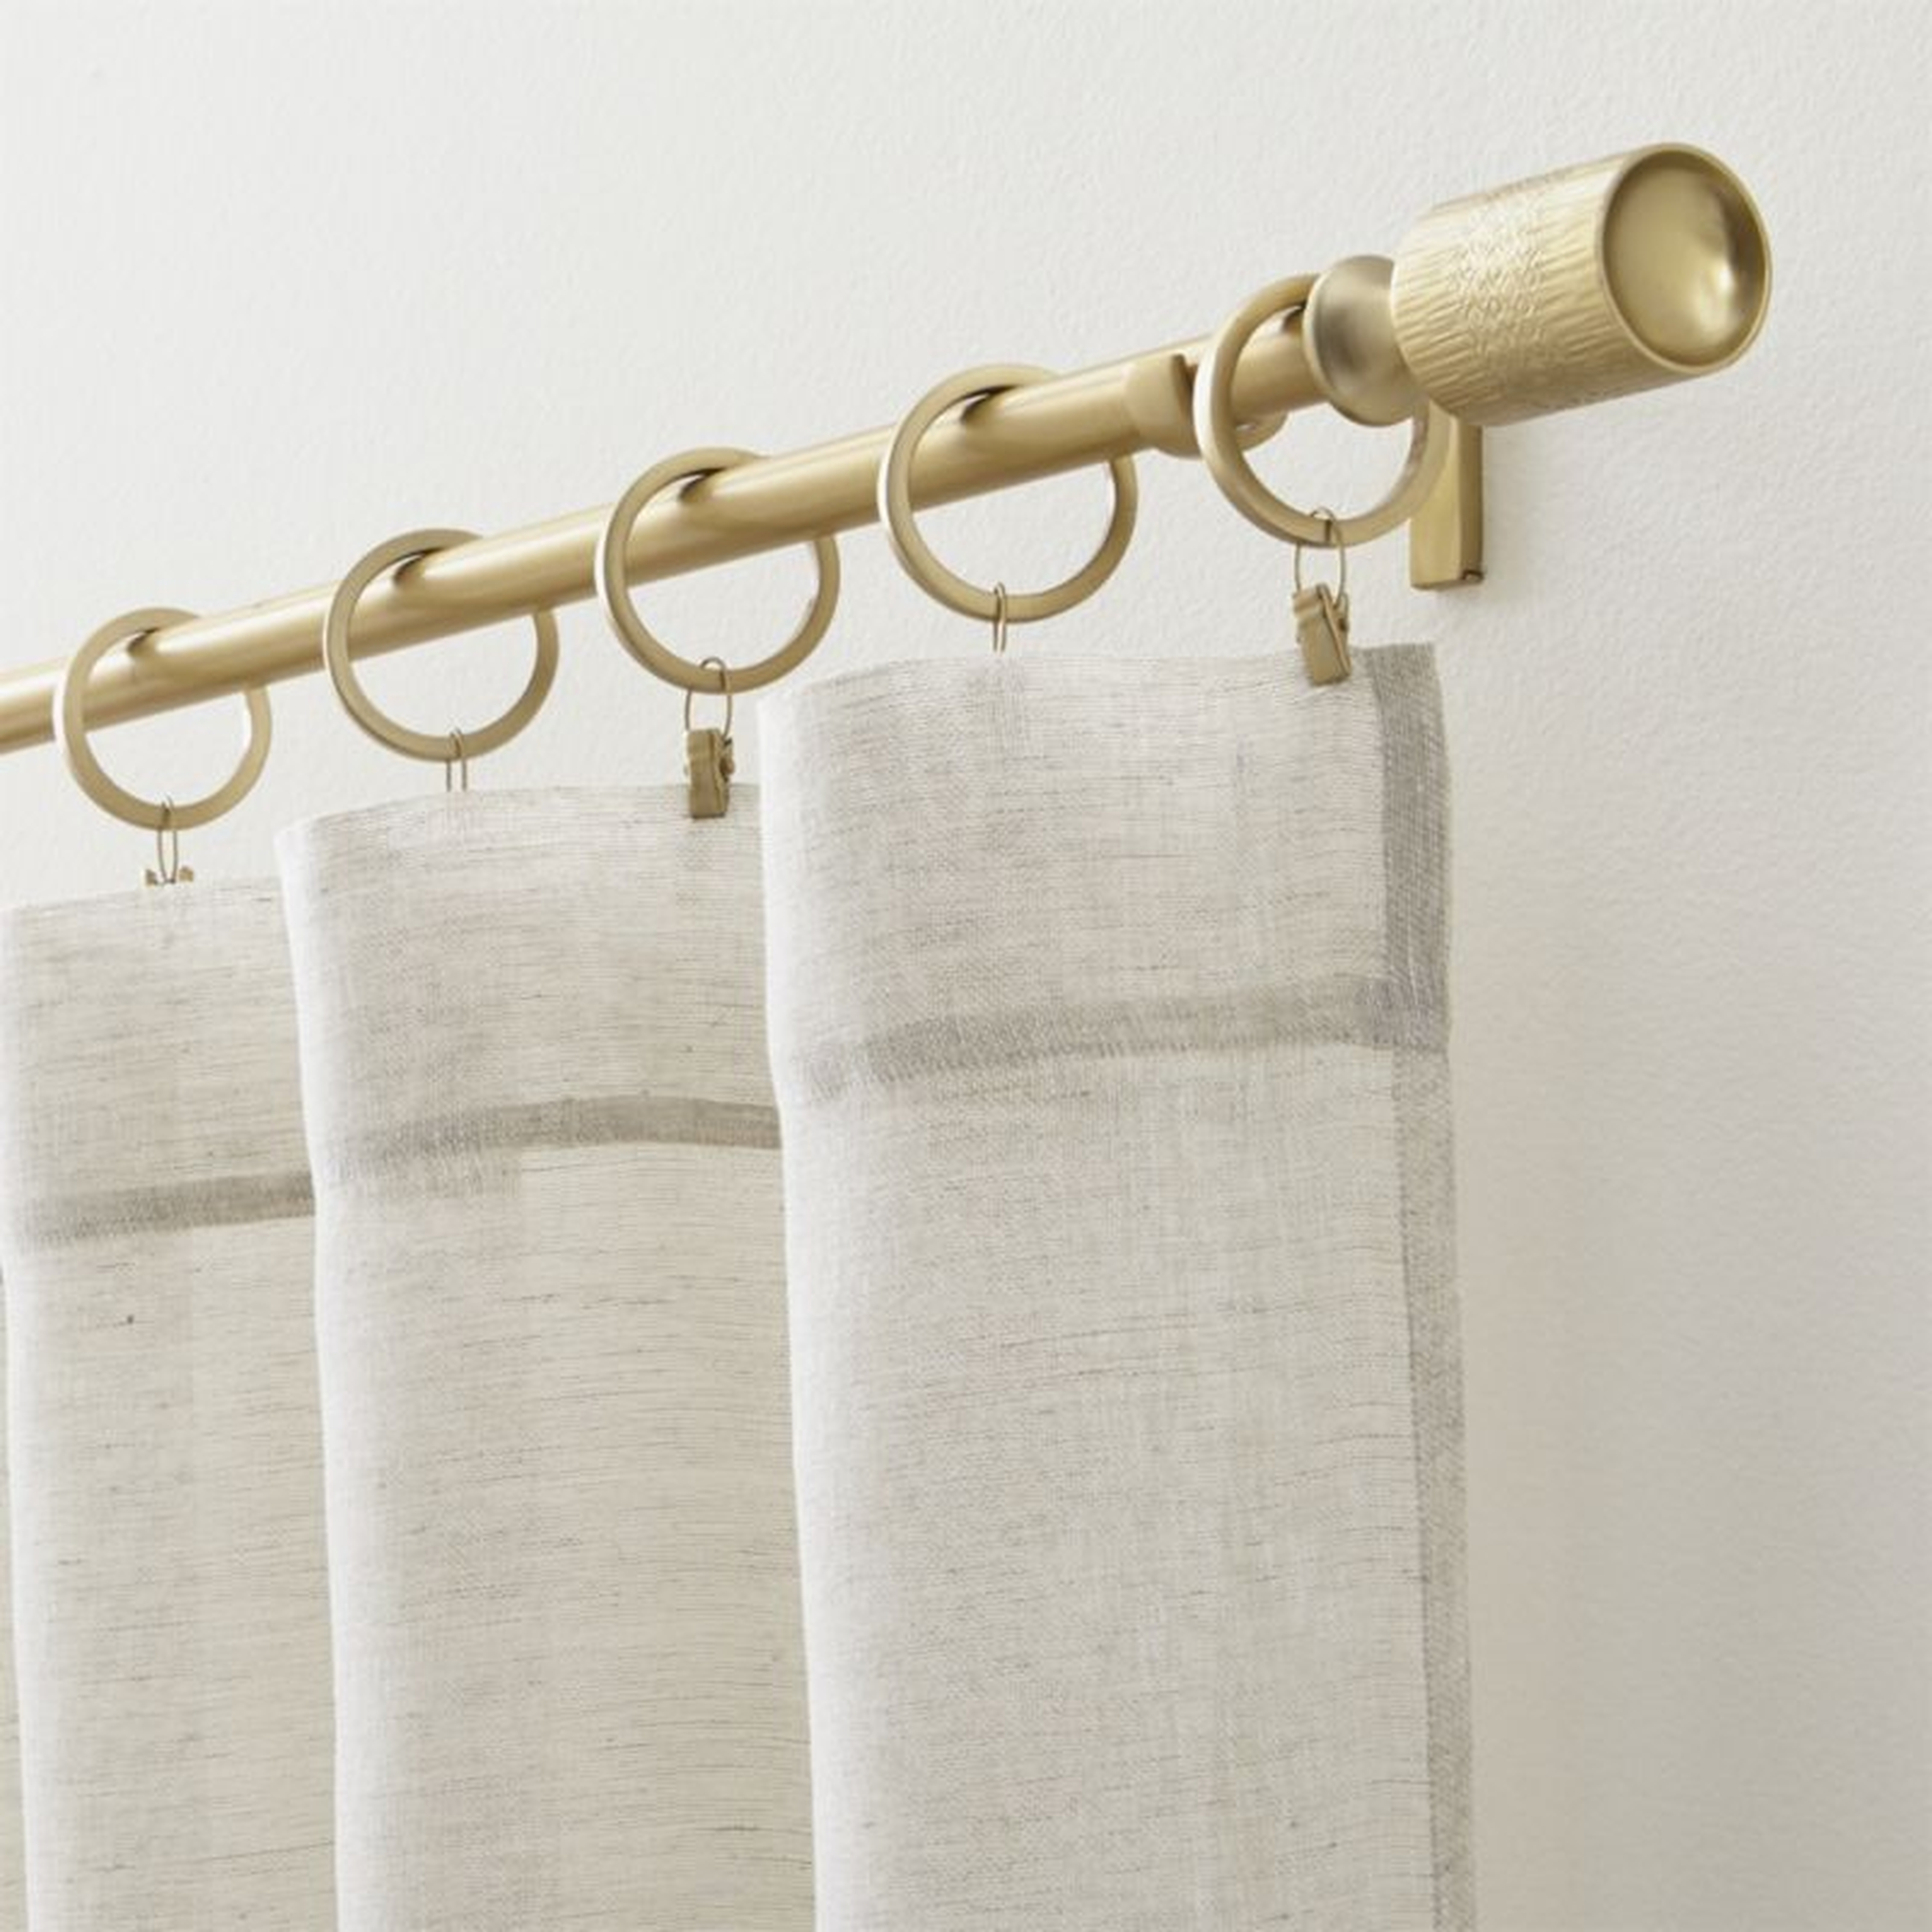 Linen Sheer 52"x96" Natural Curtain Panel - Crate and Barrel